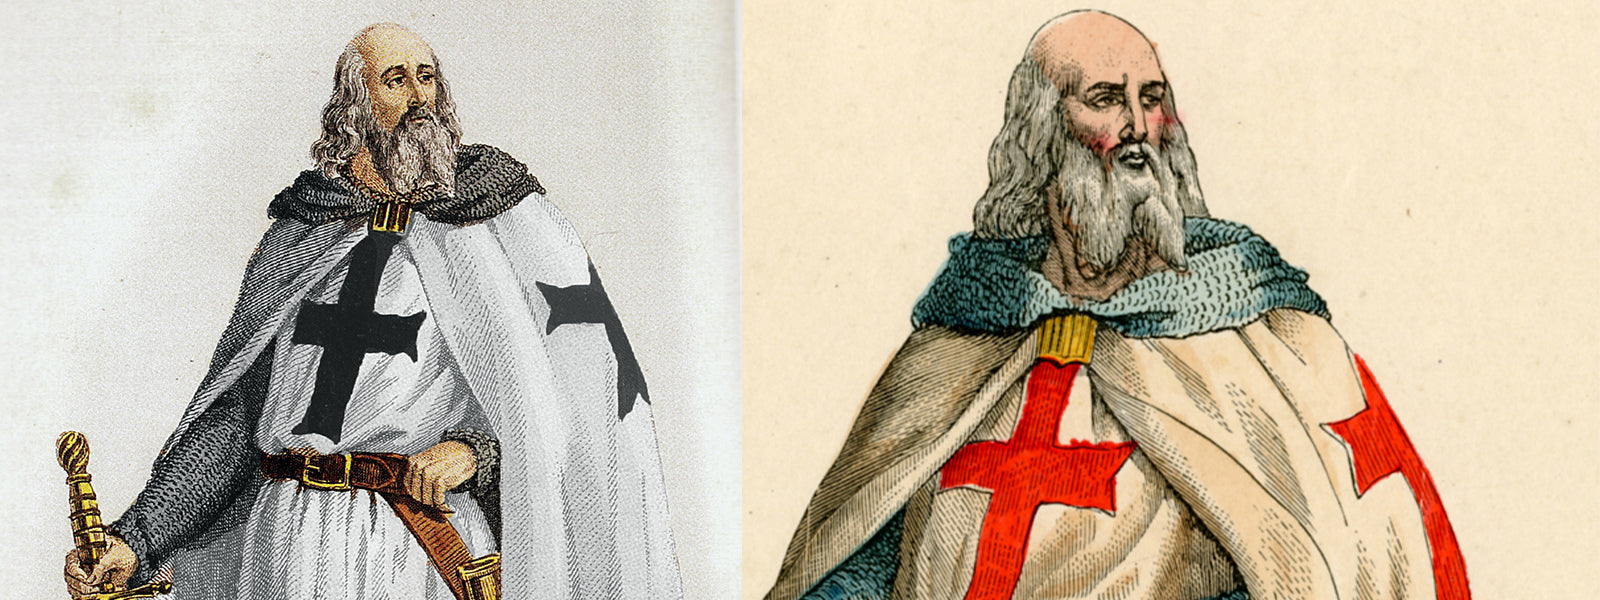 Jacques de Molai. Grand Master of the Knights Templar (one of